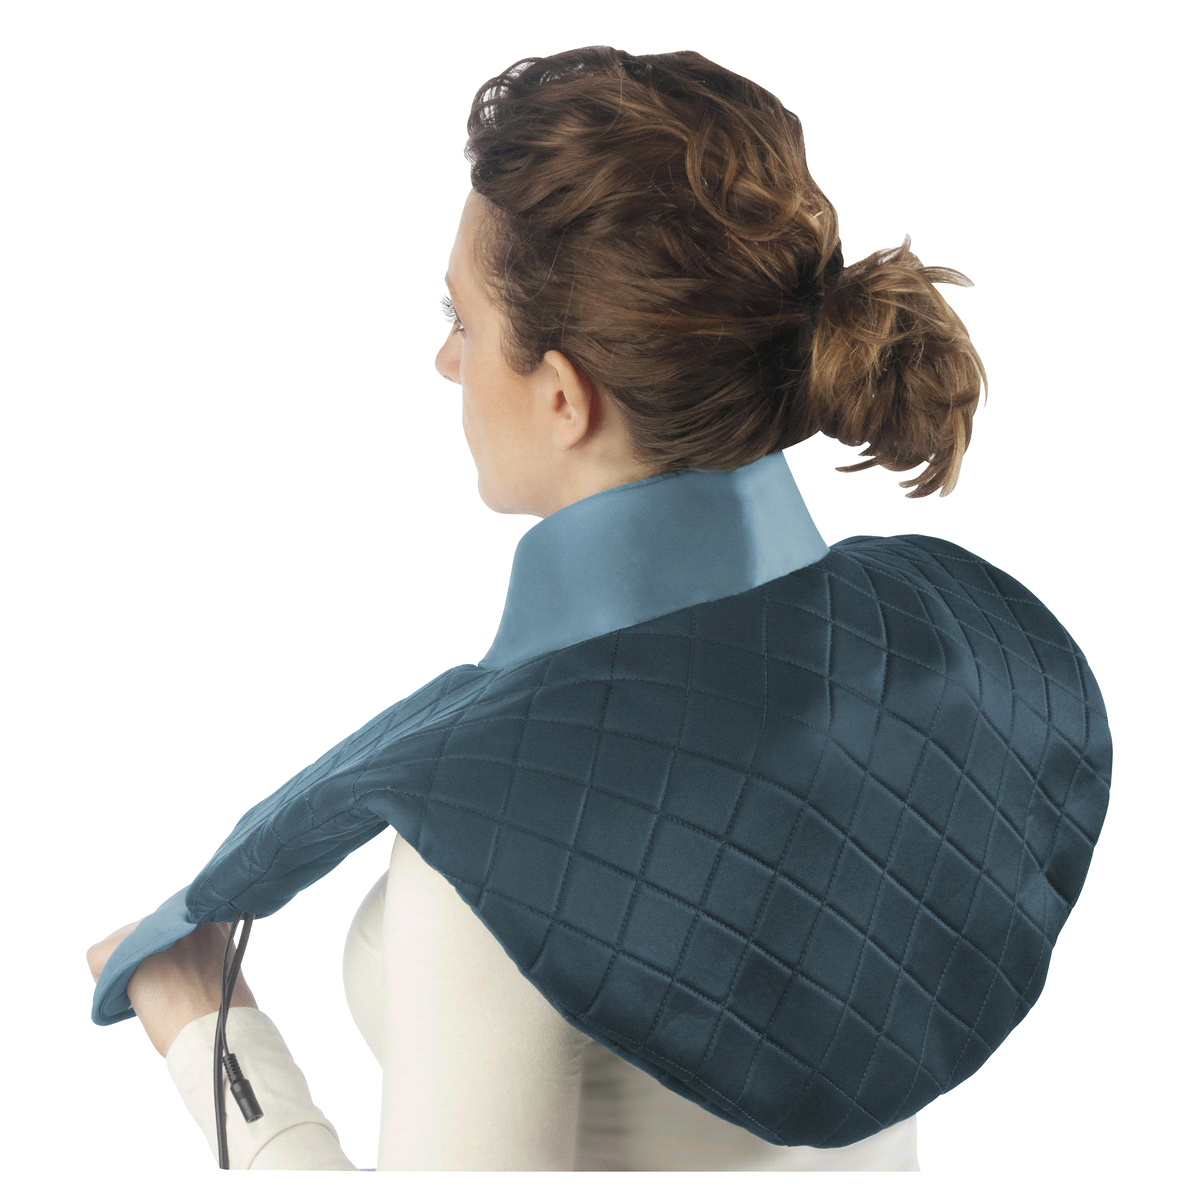 Wahl Neck & Back Massager Wrap with Heat - 97792